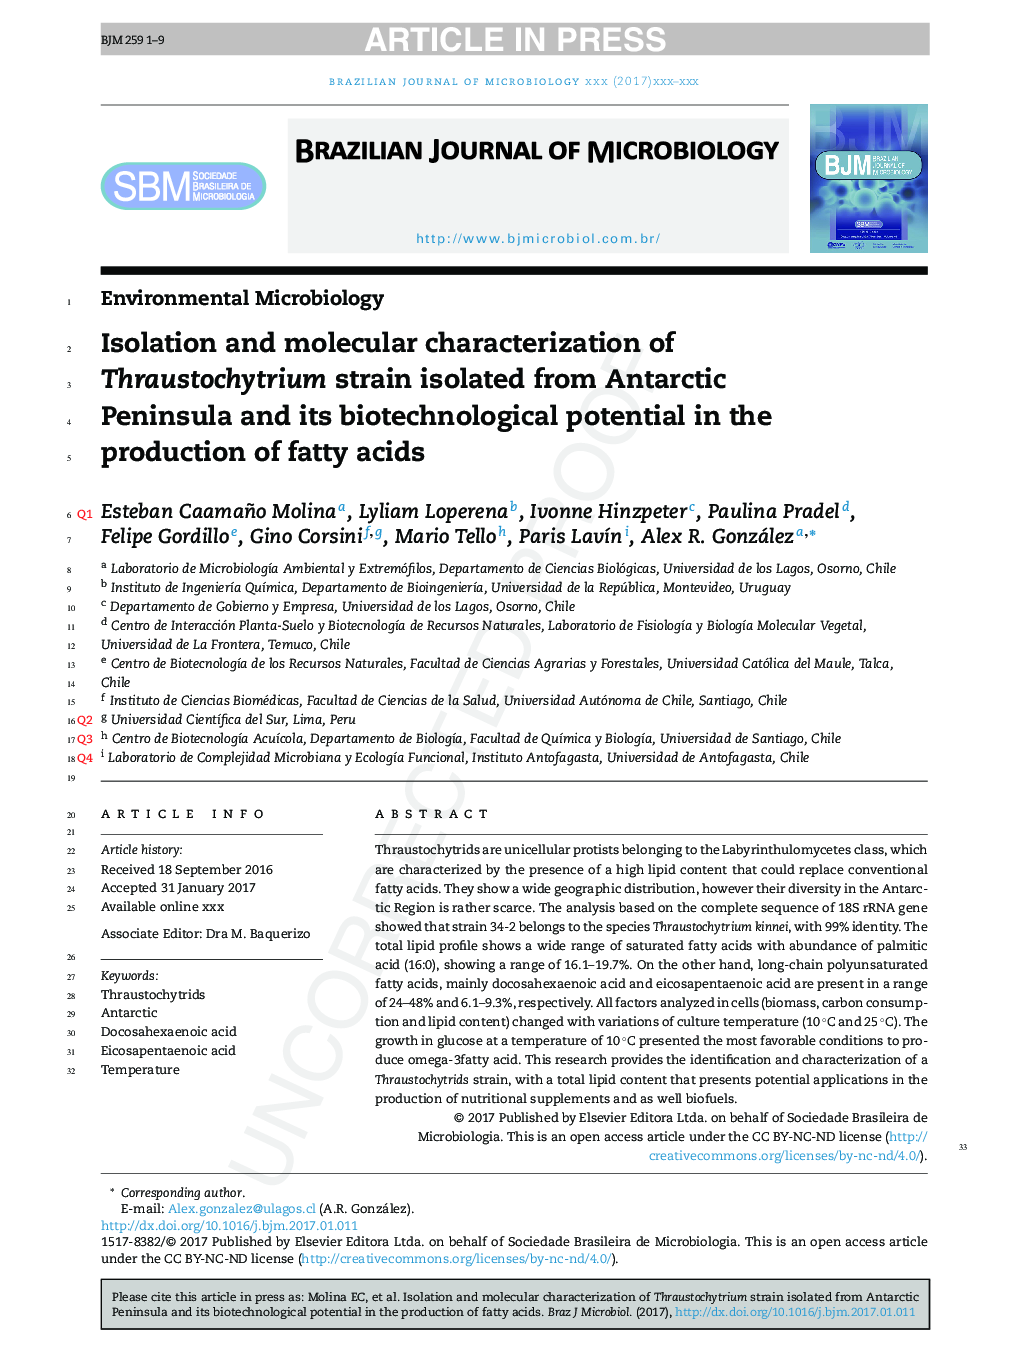 Isolation and molecular characterization of Thraustochytrium strain isolated from Antarctic Peninsula and its biotechnological potential in the production of fatty acids